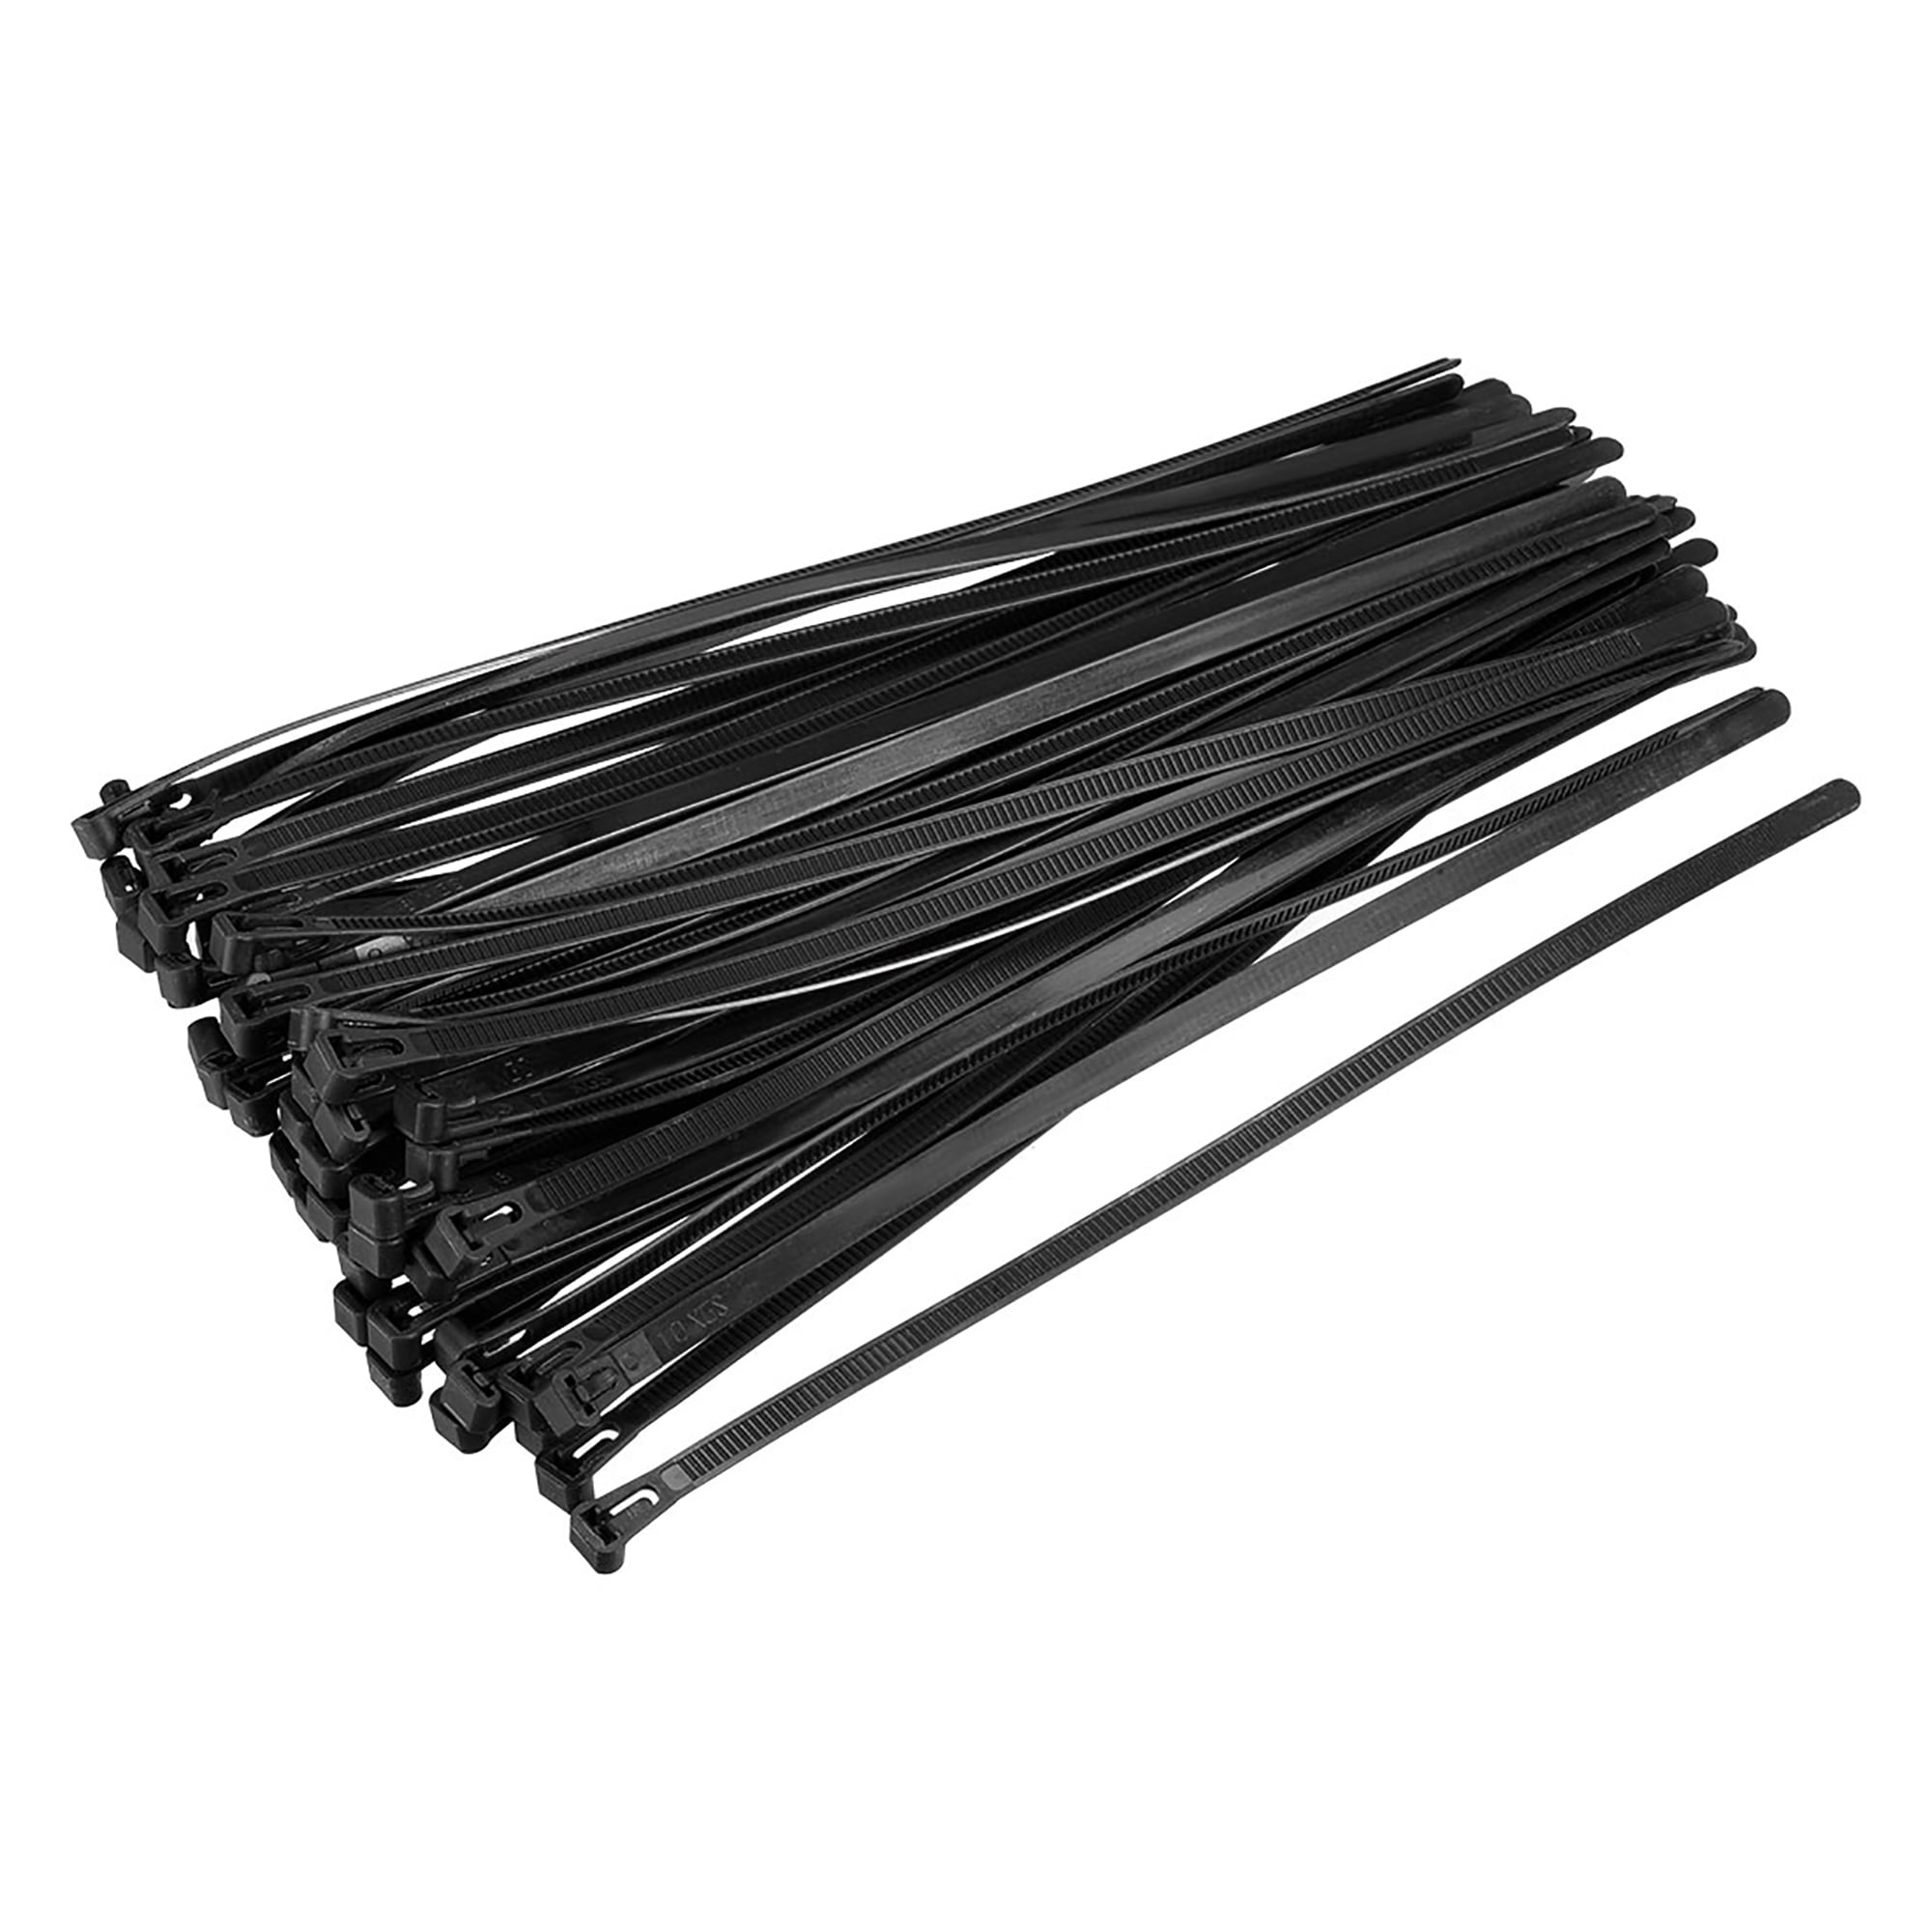 UL 50 LB 8 INCH CABLE TIES 4.8X200MM UV WEATHER RESISTANT 200 PCS BLACK